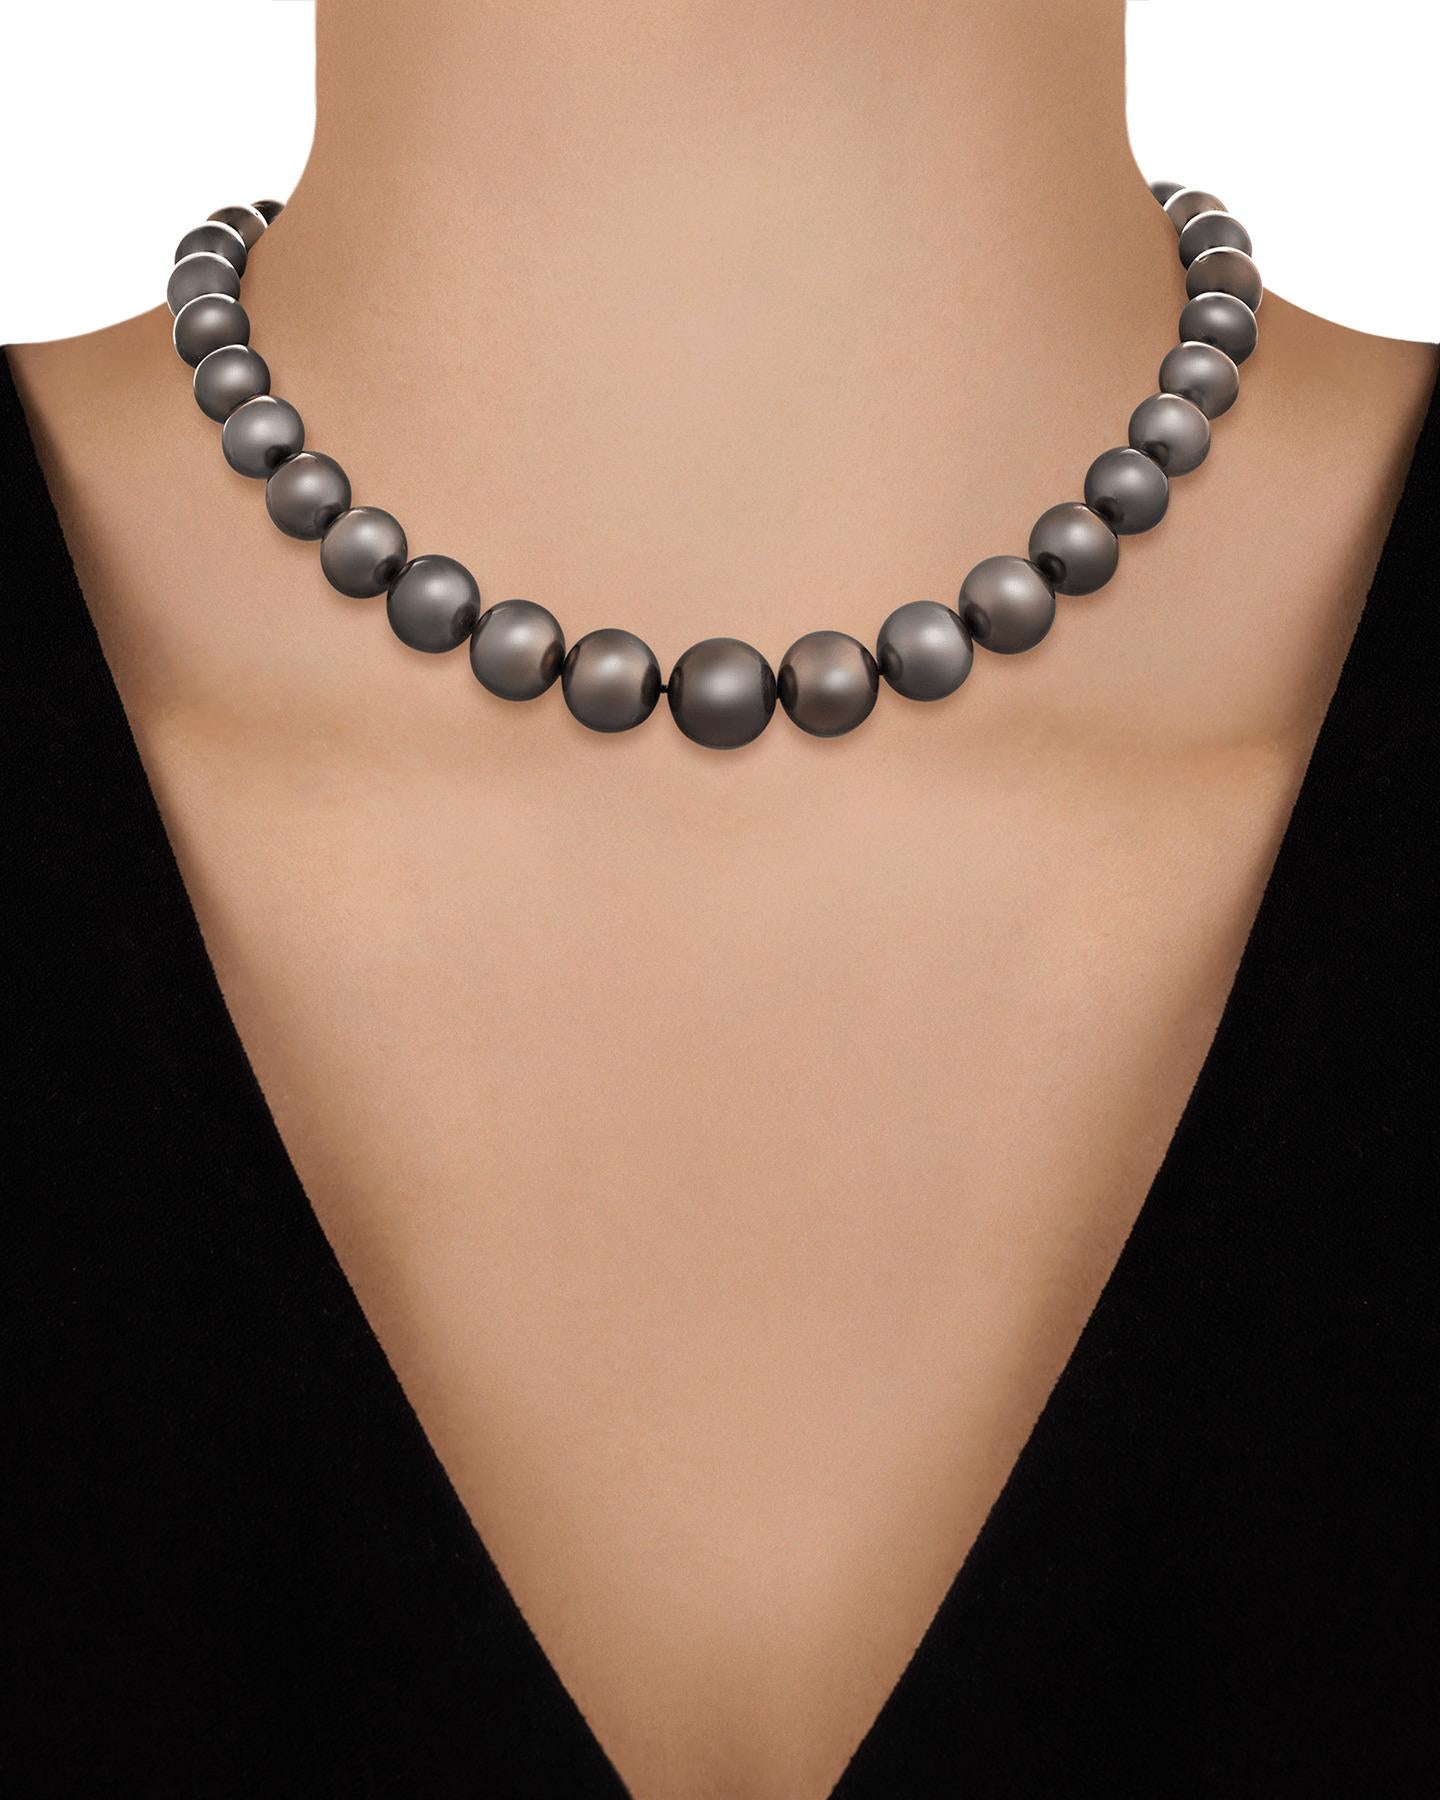 Displaying a lustrous silvery hue, the thirty-seven Tahitian pearls in this necklace range in size from 13mm to 15mm. Prized for their luminous coloring, pearls hailing from the waters of the South Pacific are the most coveted in the world. Farmed